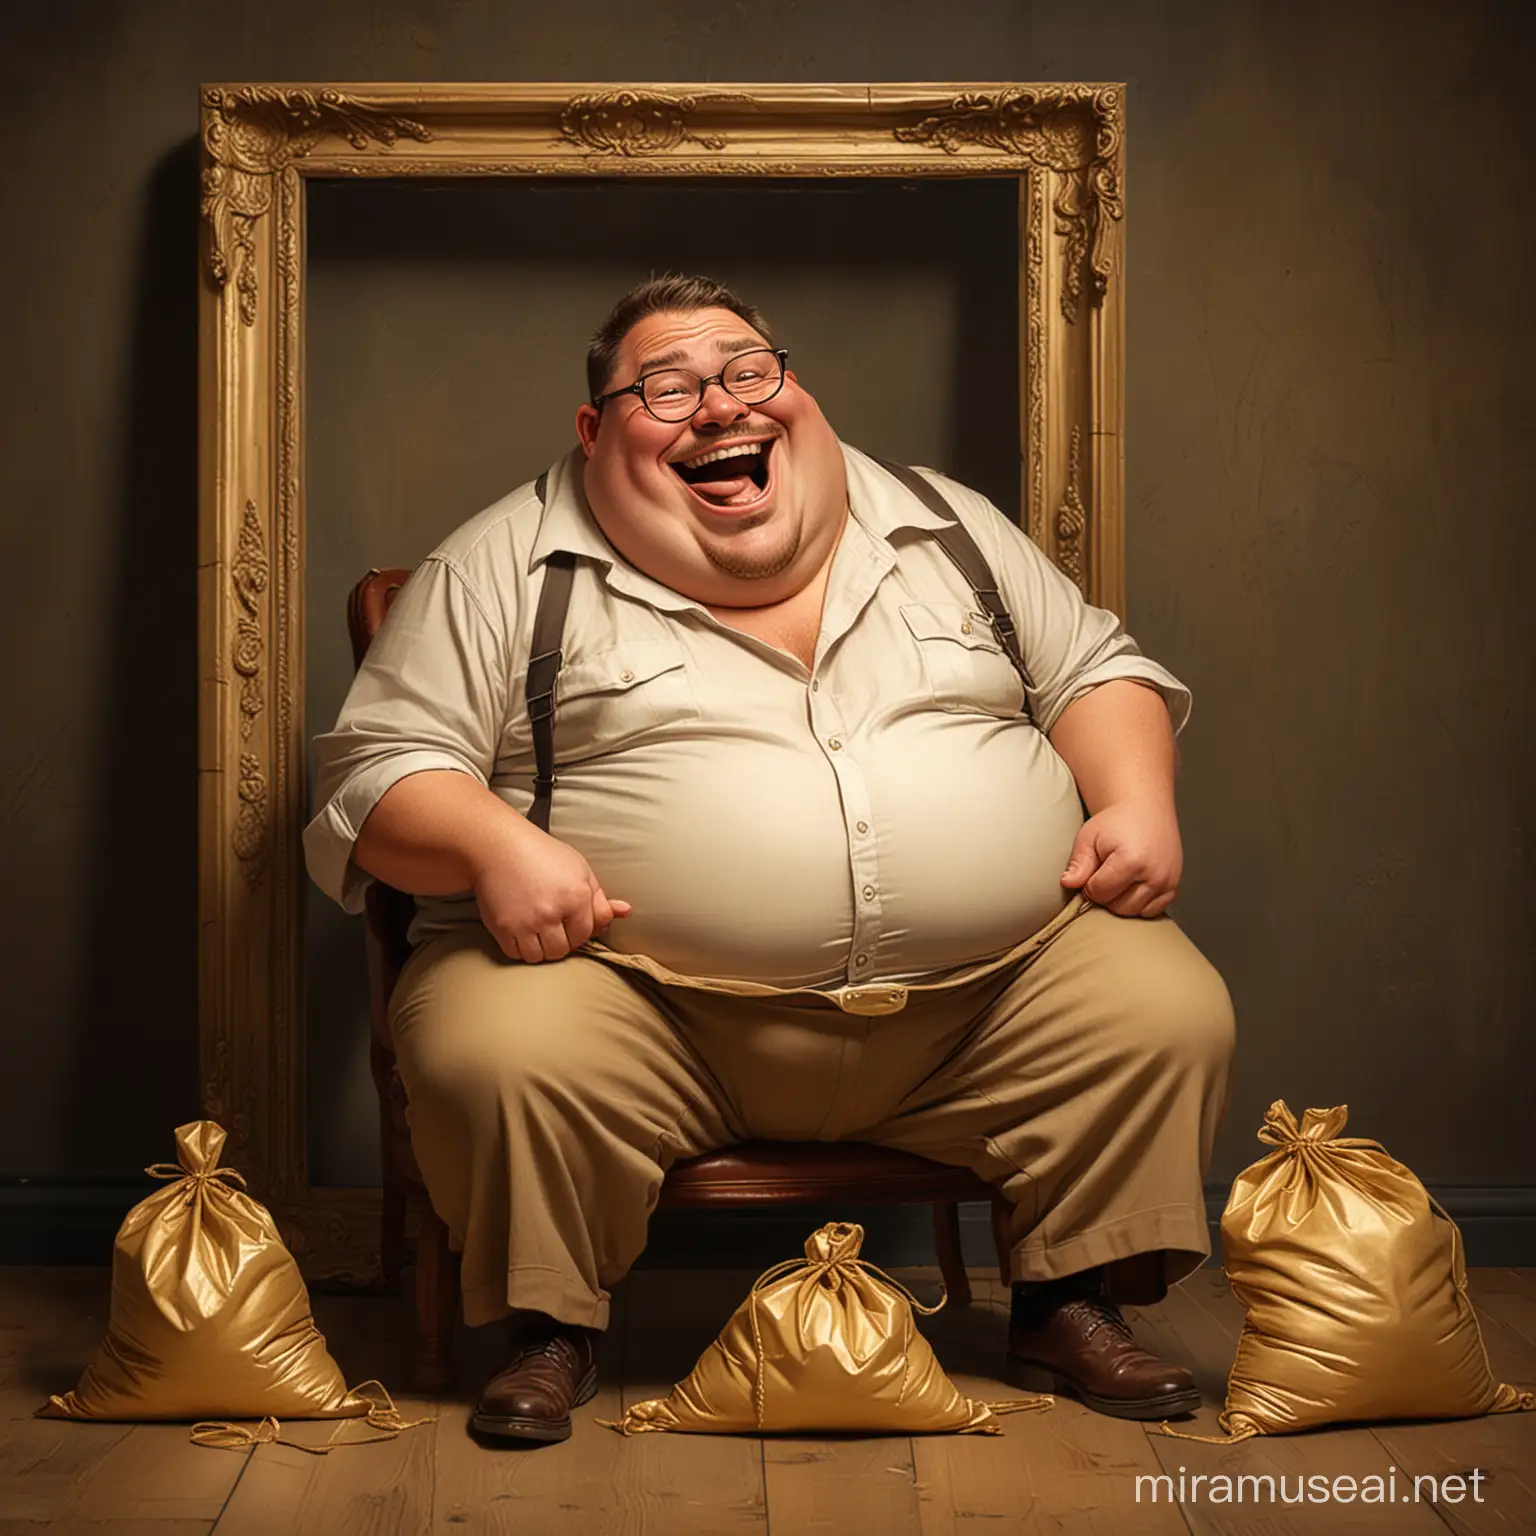 Jovial Overweight Man in Stylish Attire and Gold Accents